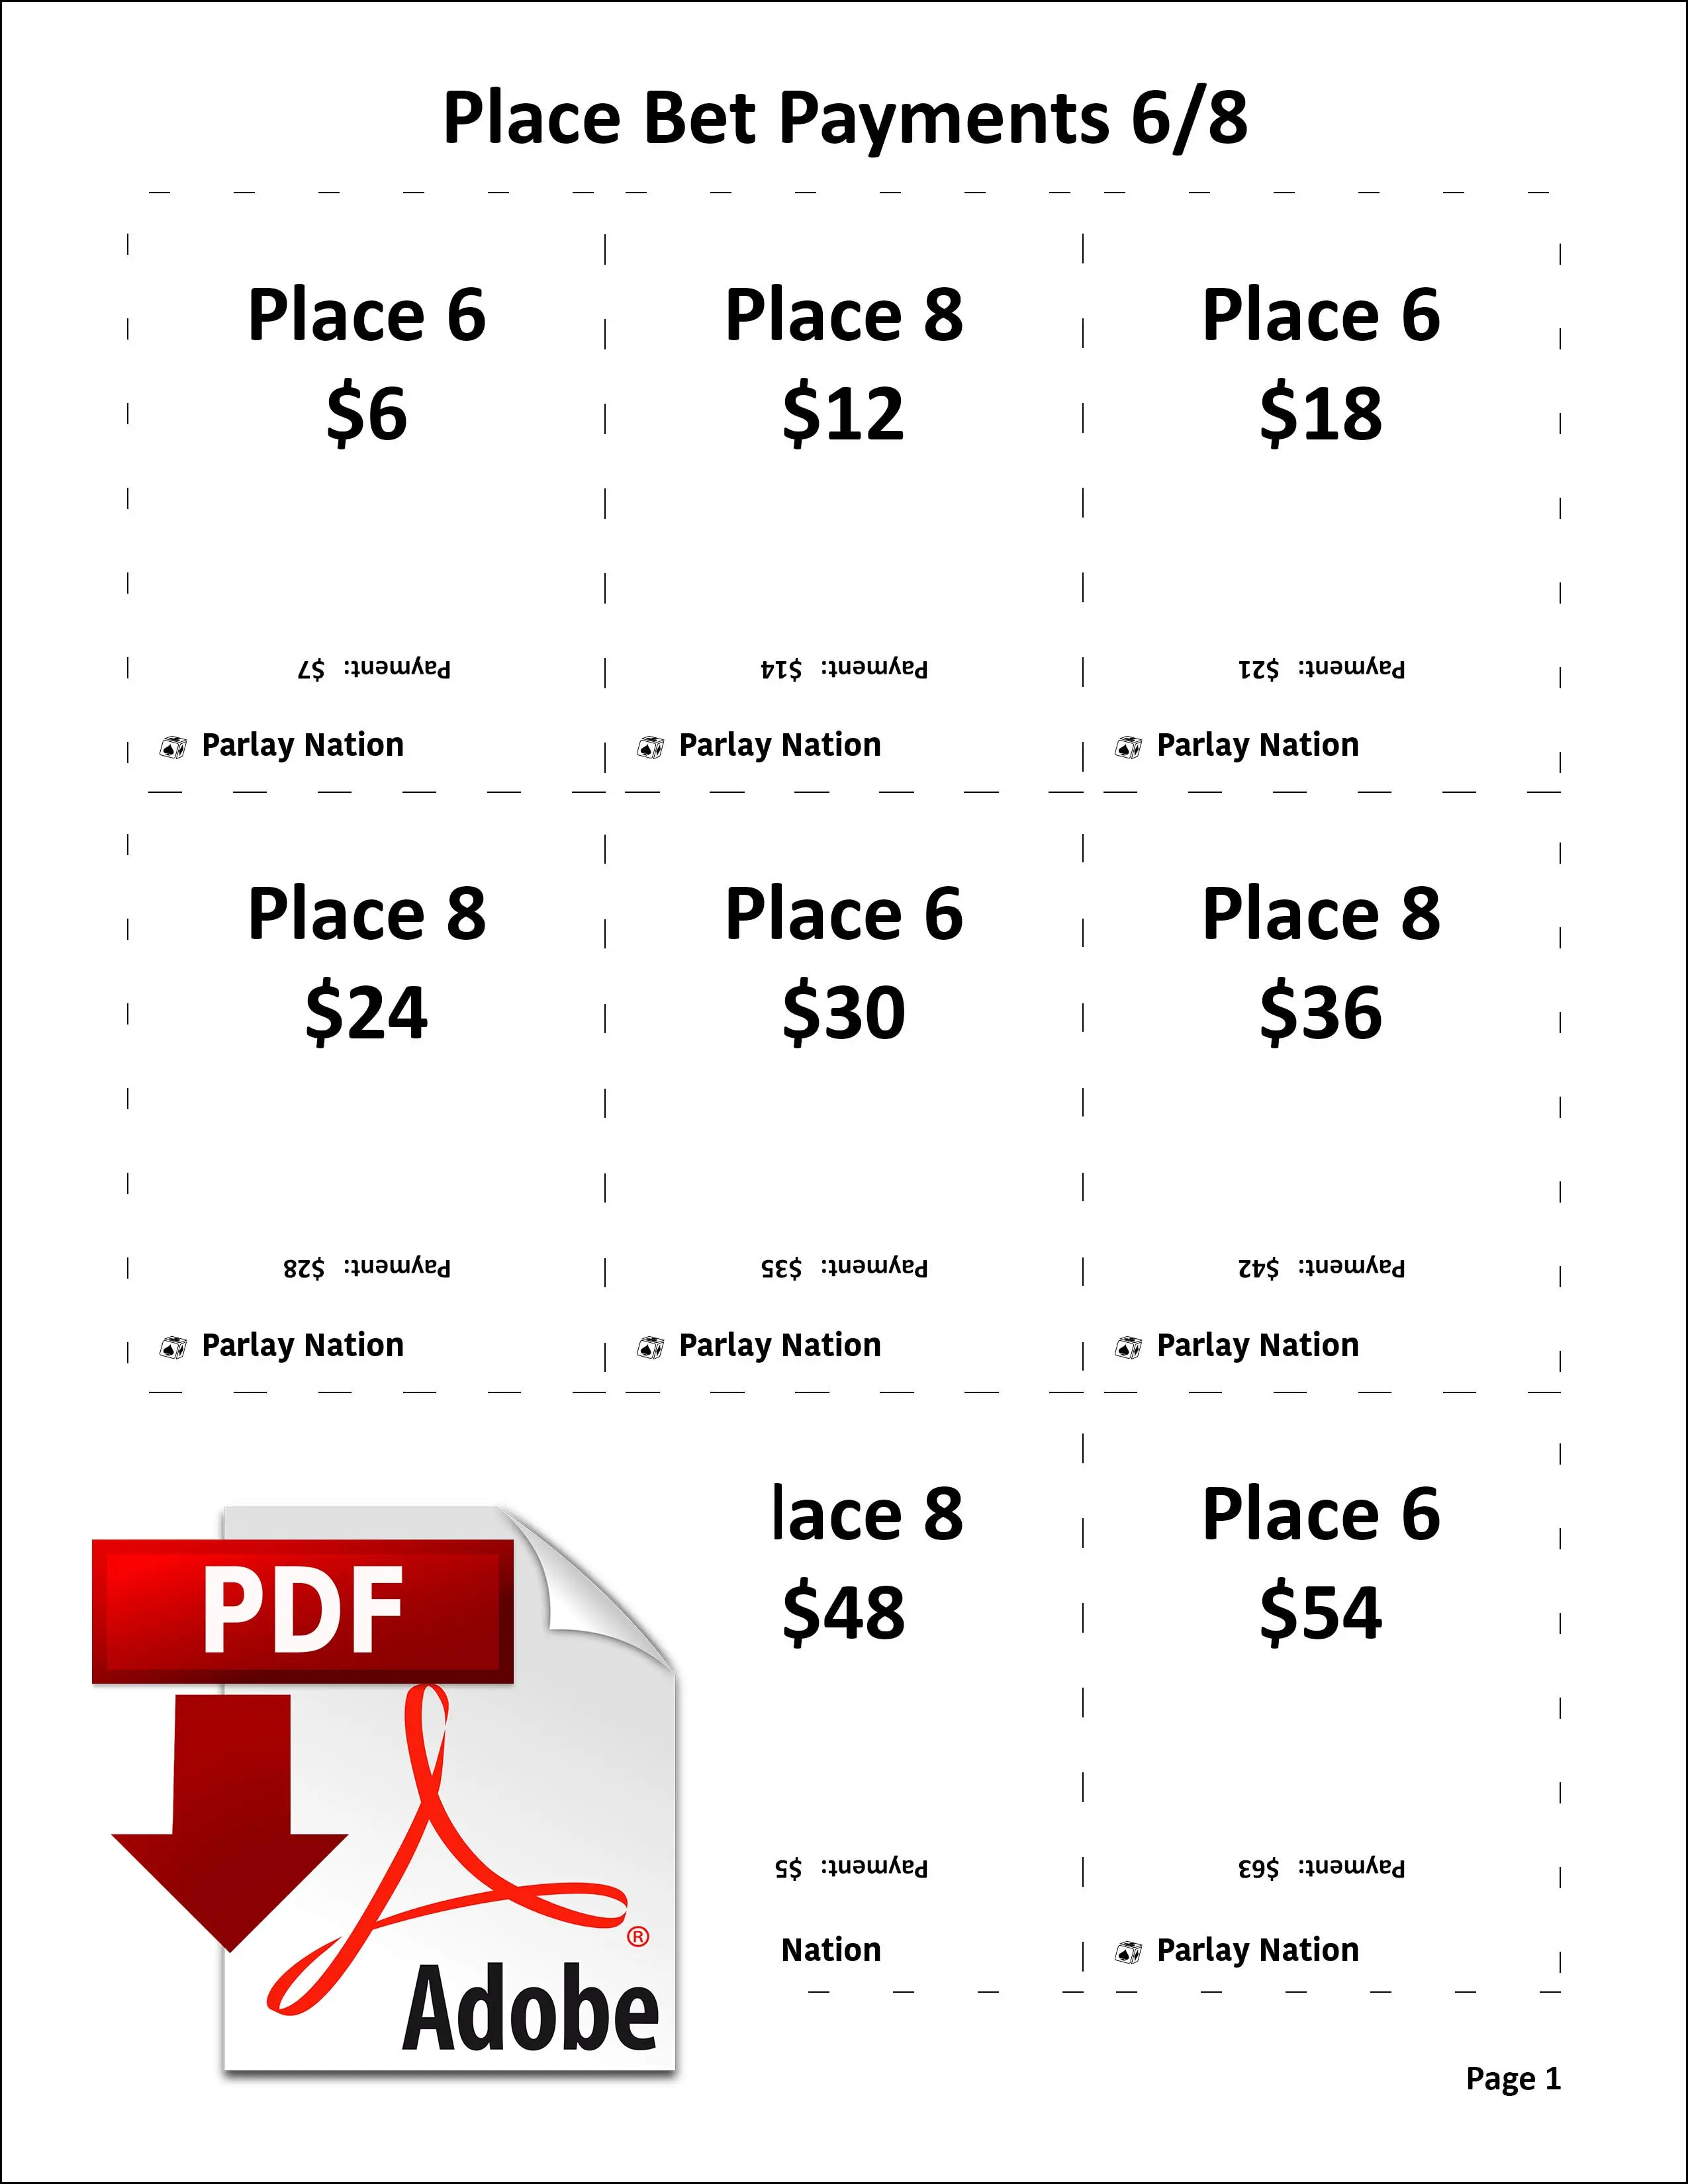 Place Bet Payments 6 & 8 cover sheet.